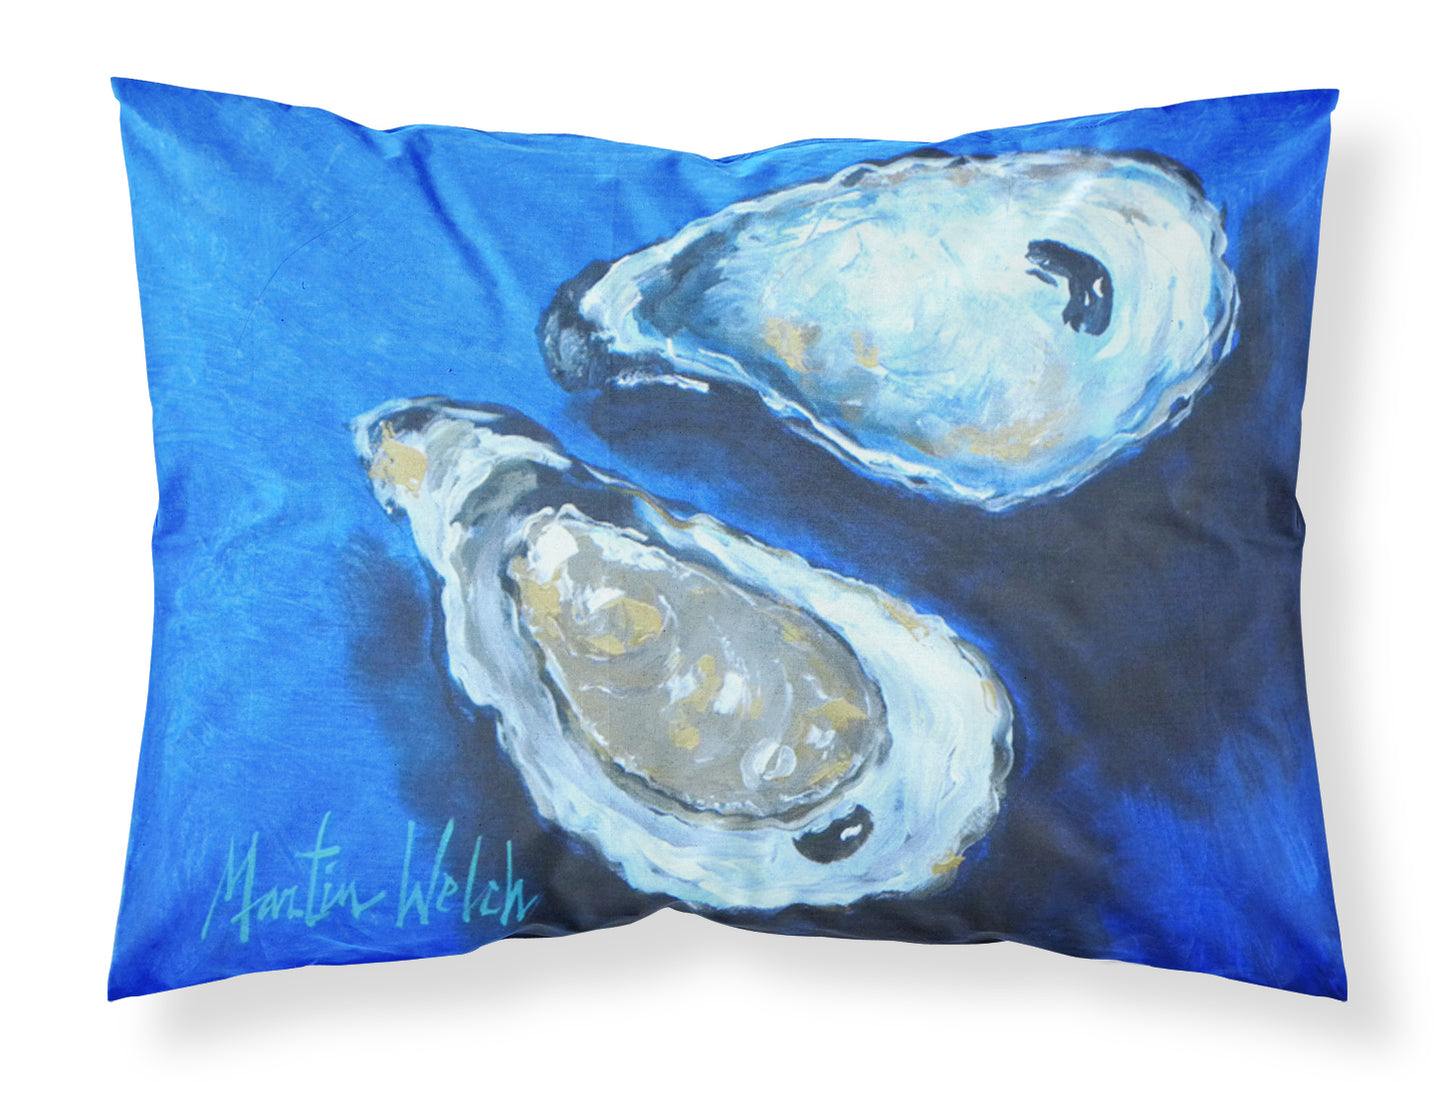 Buy this Oysters Seafood Four Fabric Standard Pillowcase